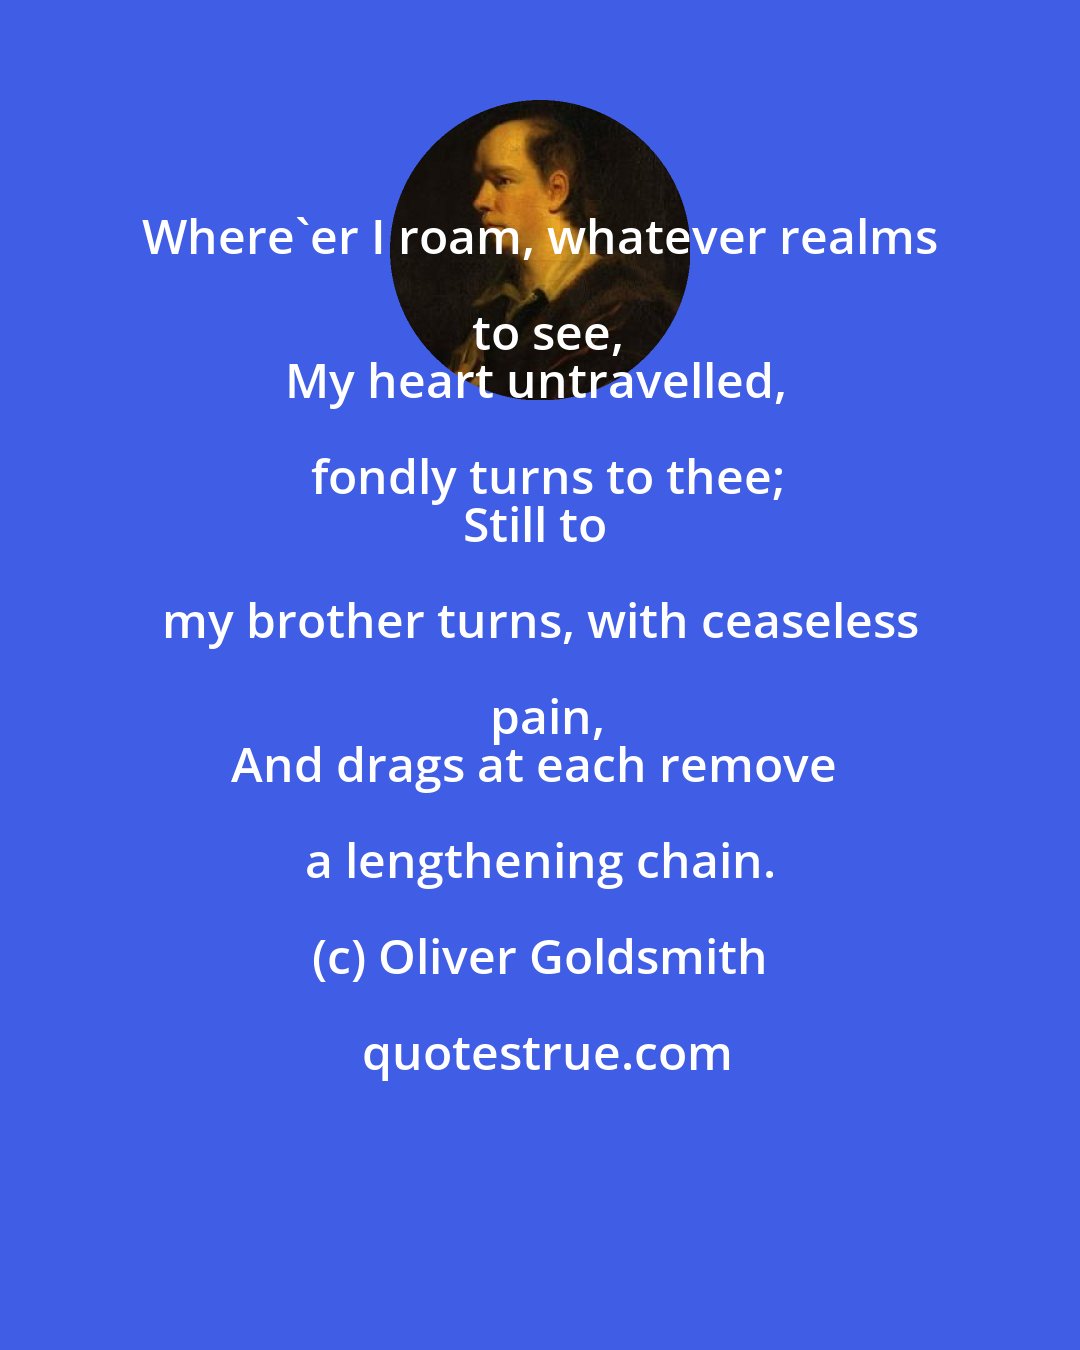 Oliver Goldsmith: Where'er I roam, whatever realms to see,
My heart untravelled, fondly turns to thee;
Still to my brother turns, with ceaseless pain,
And drags at each remove a lengthening chain.